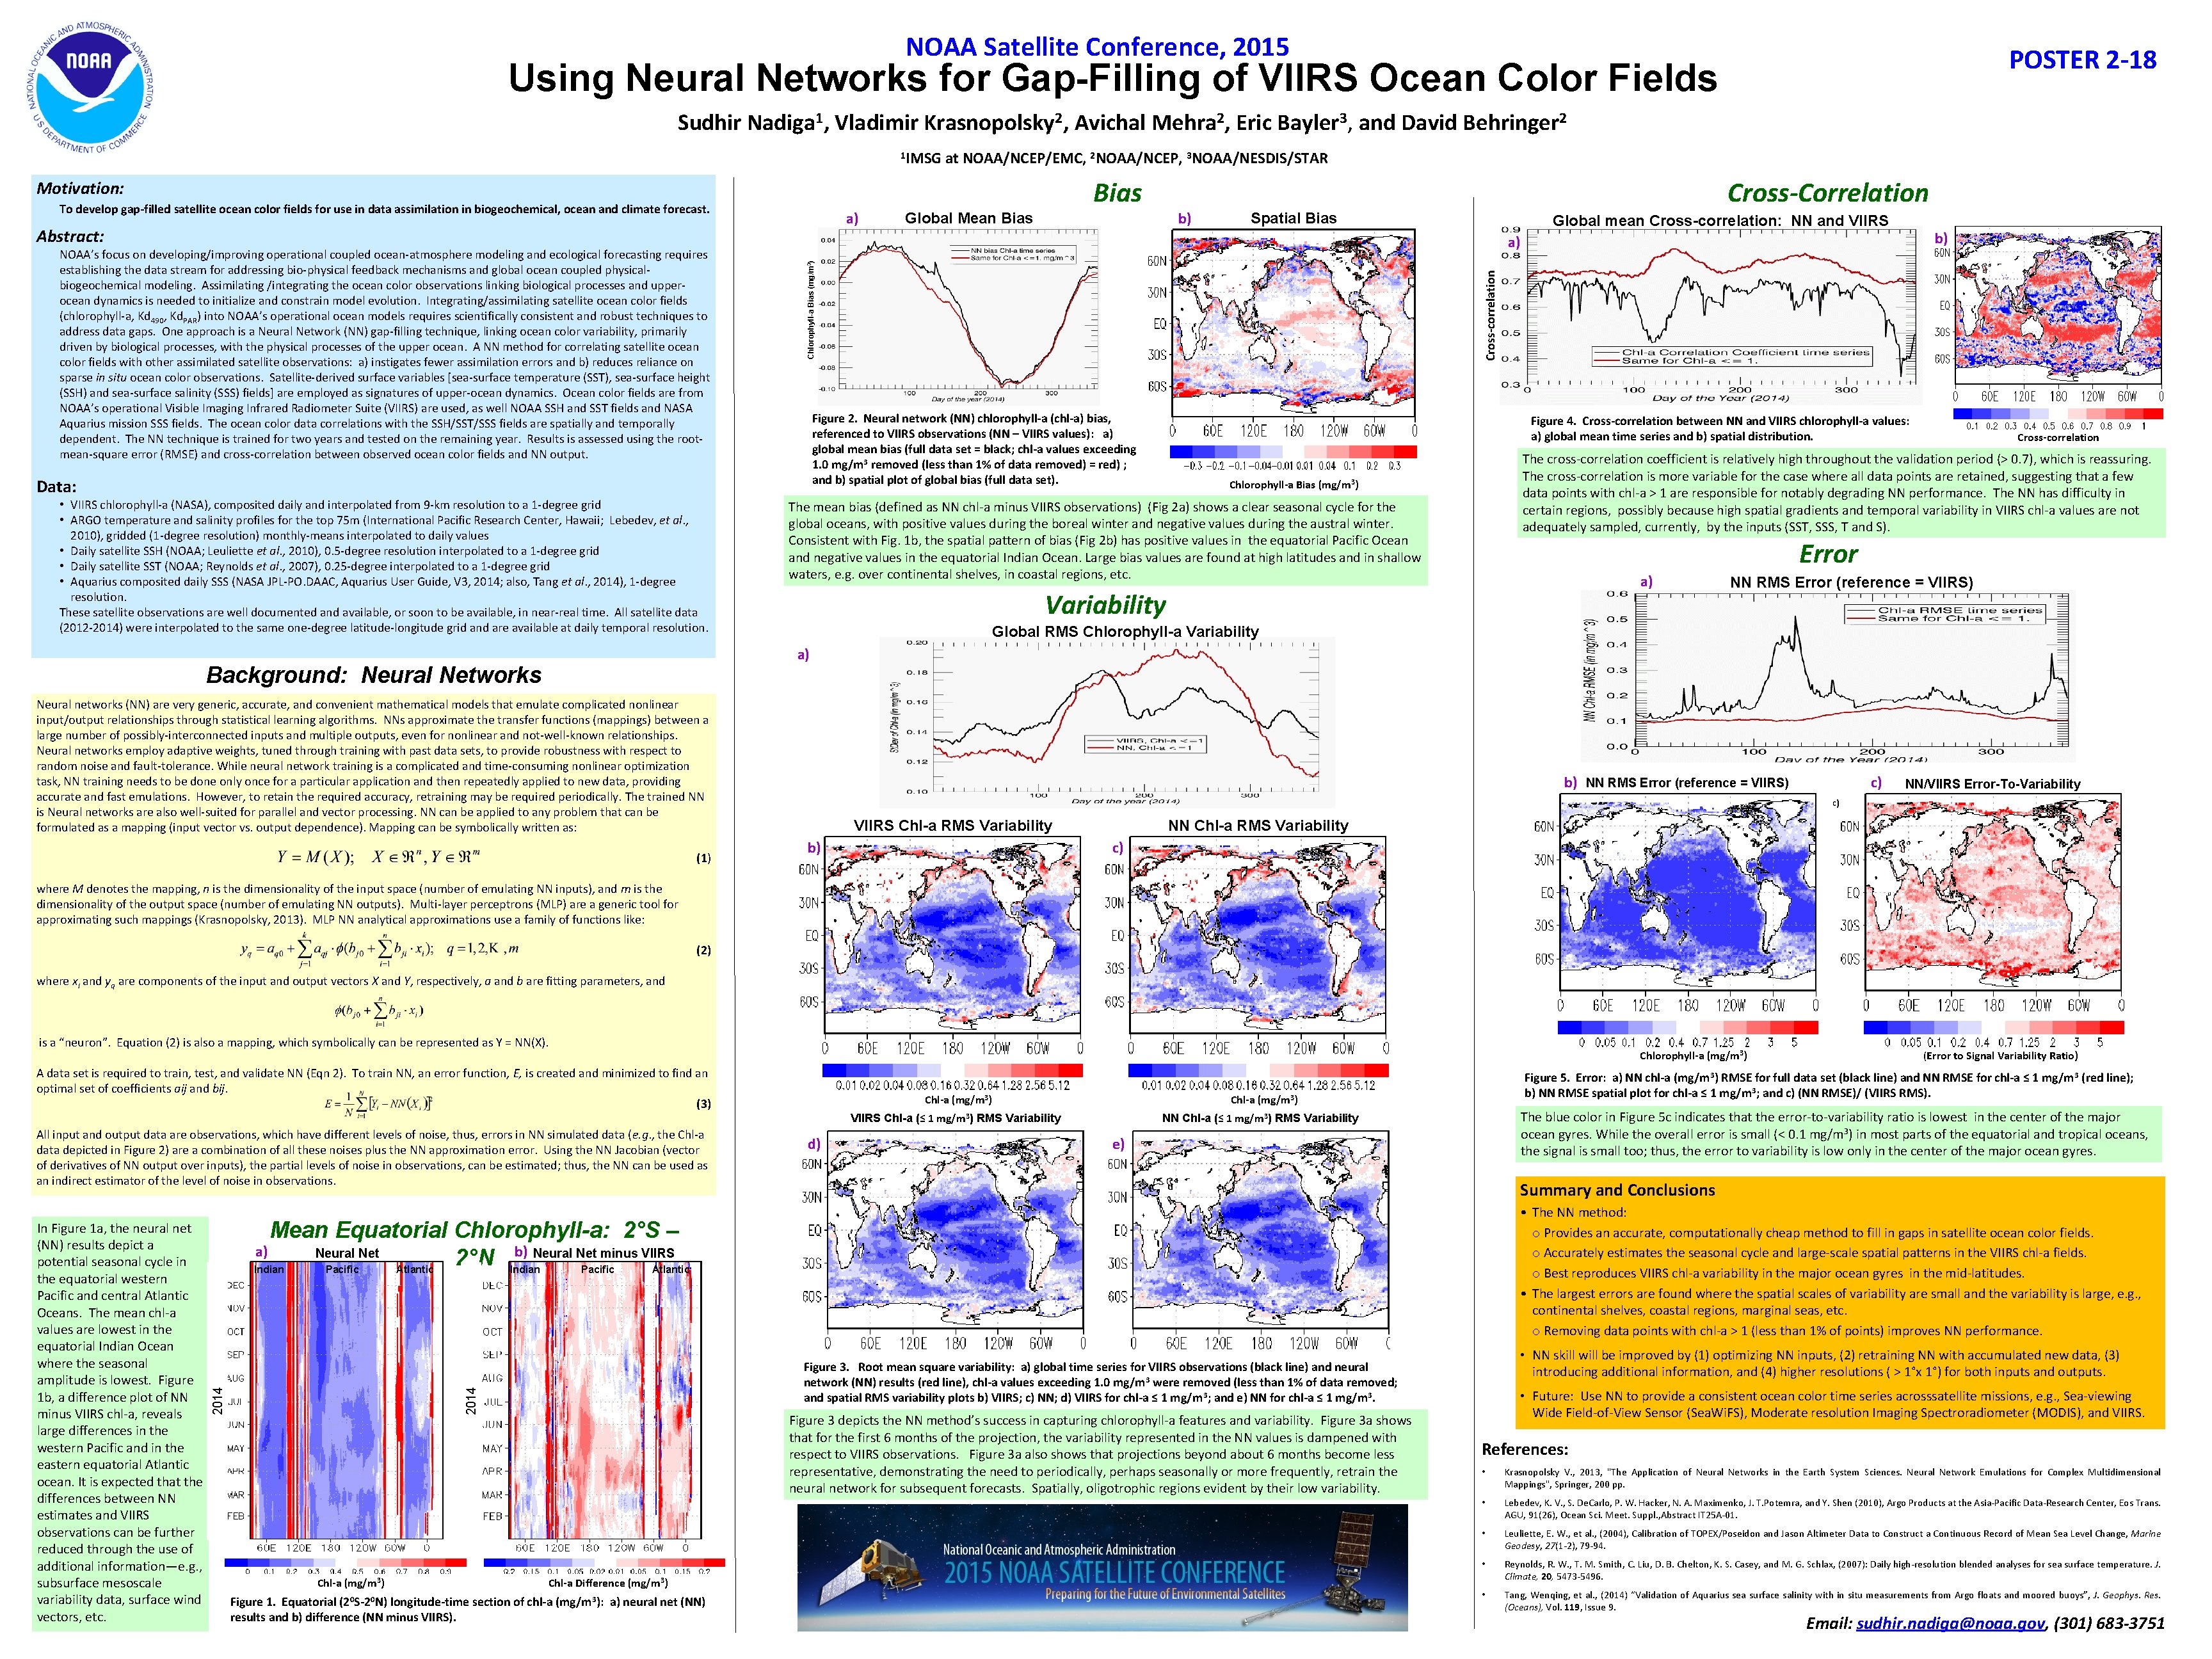 NOAA Satellite Conference, 2015 POSTER 2 -18 Using Neural Networks for Gap-Filling of VIIRS